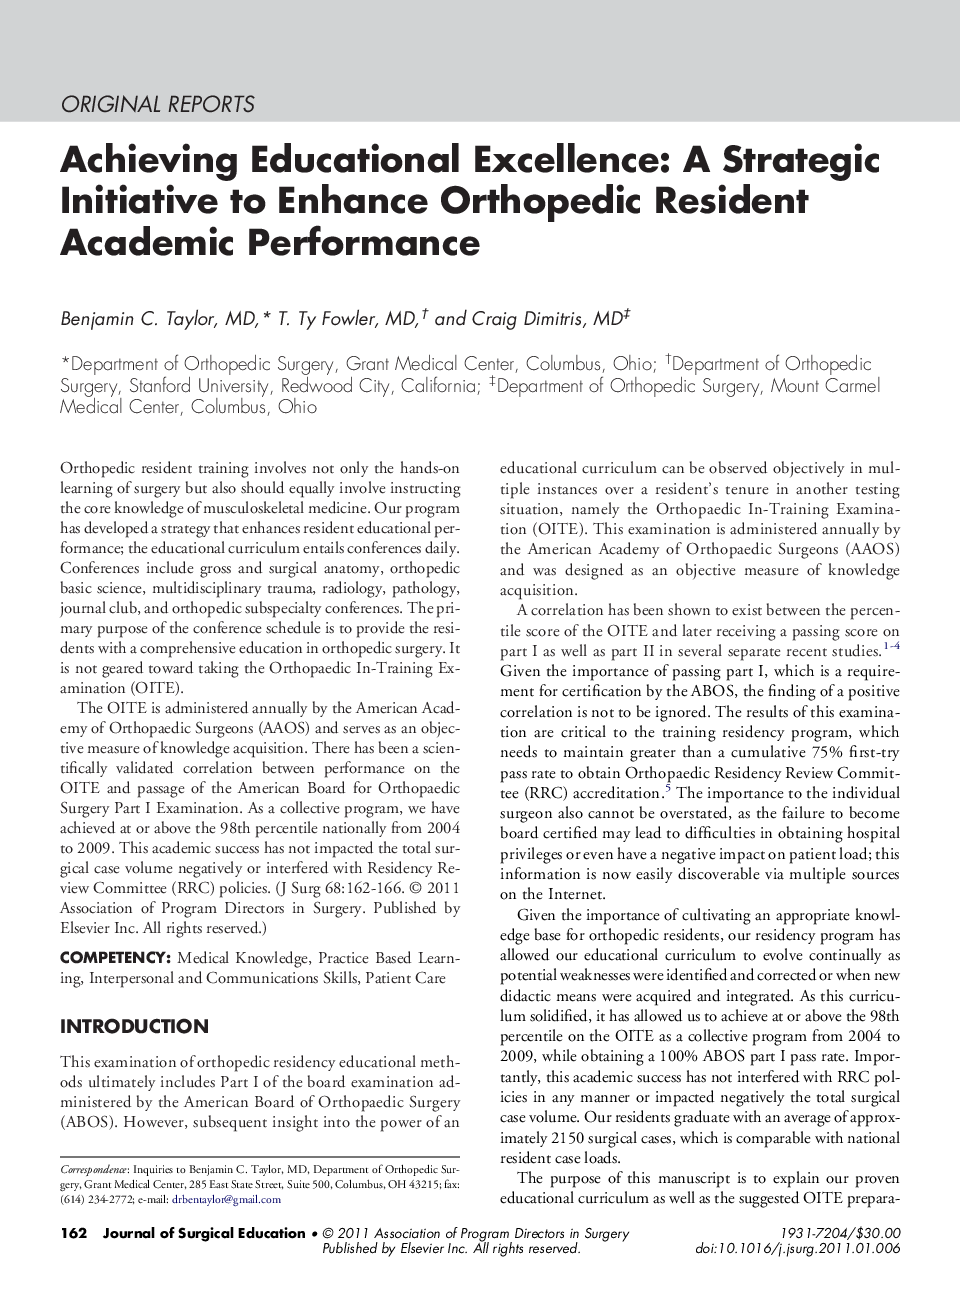 Achieving Educational Excellence: A Strategic Initiative to Enhance Orthopedic Resident Academic Performance